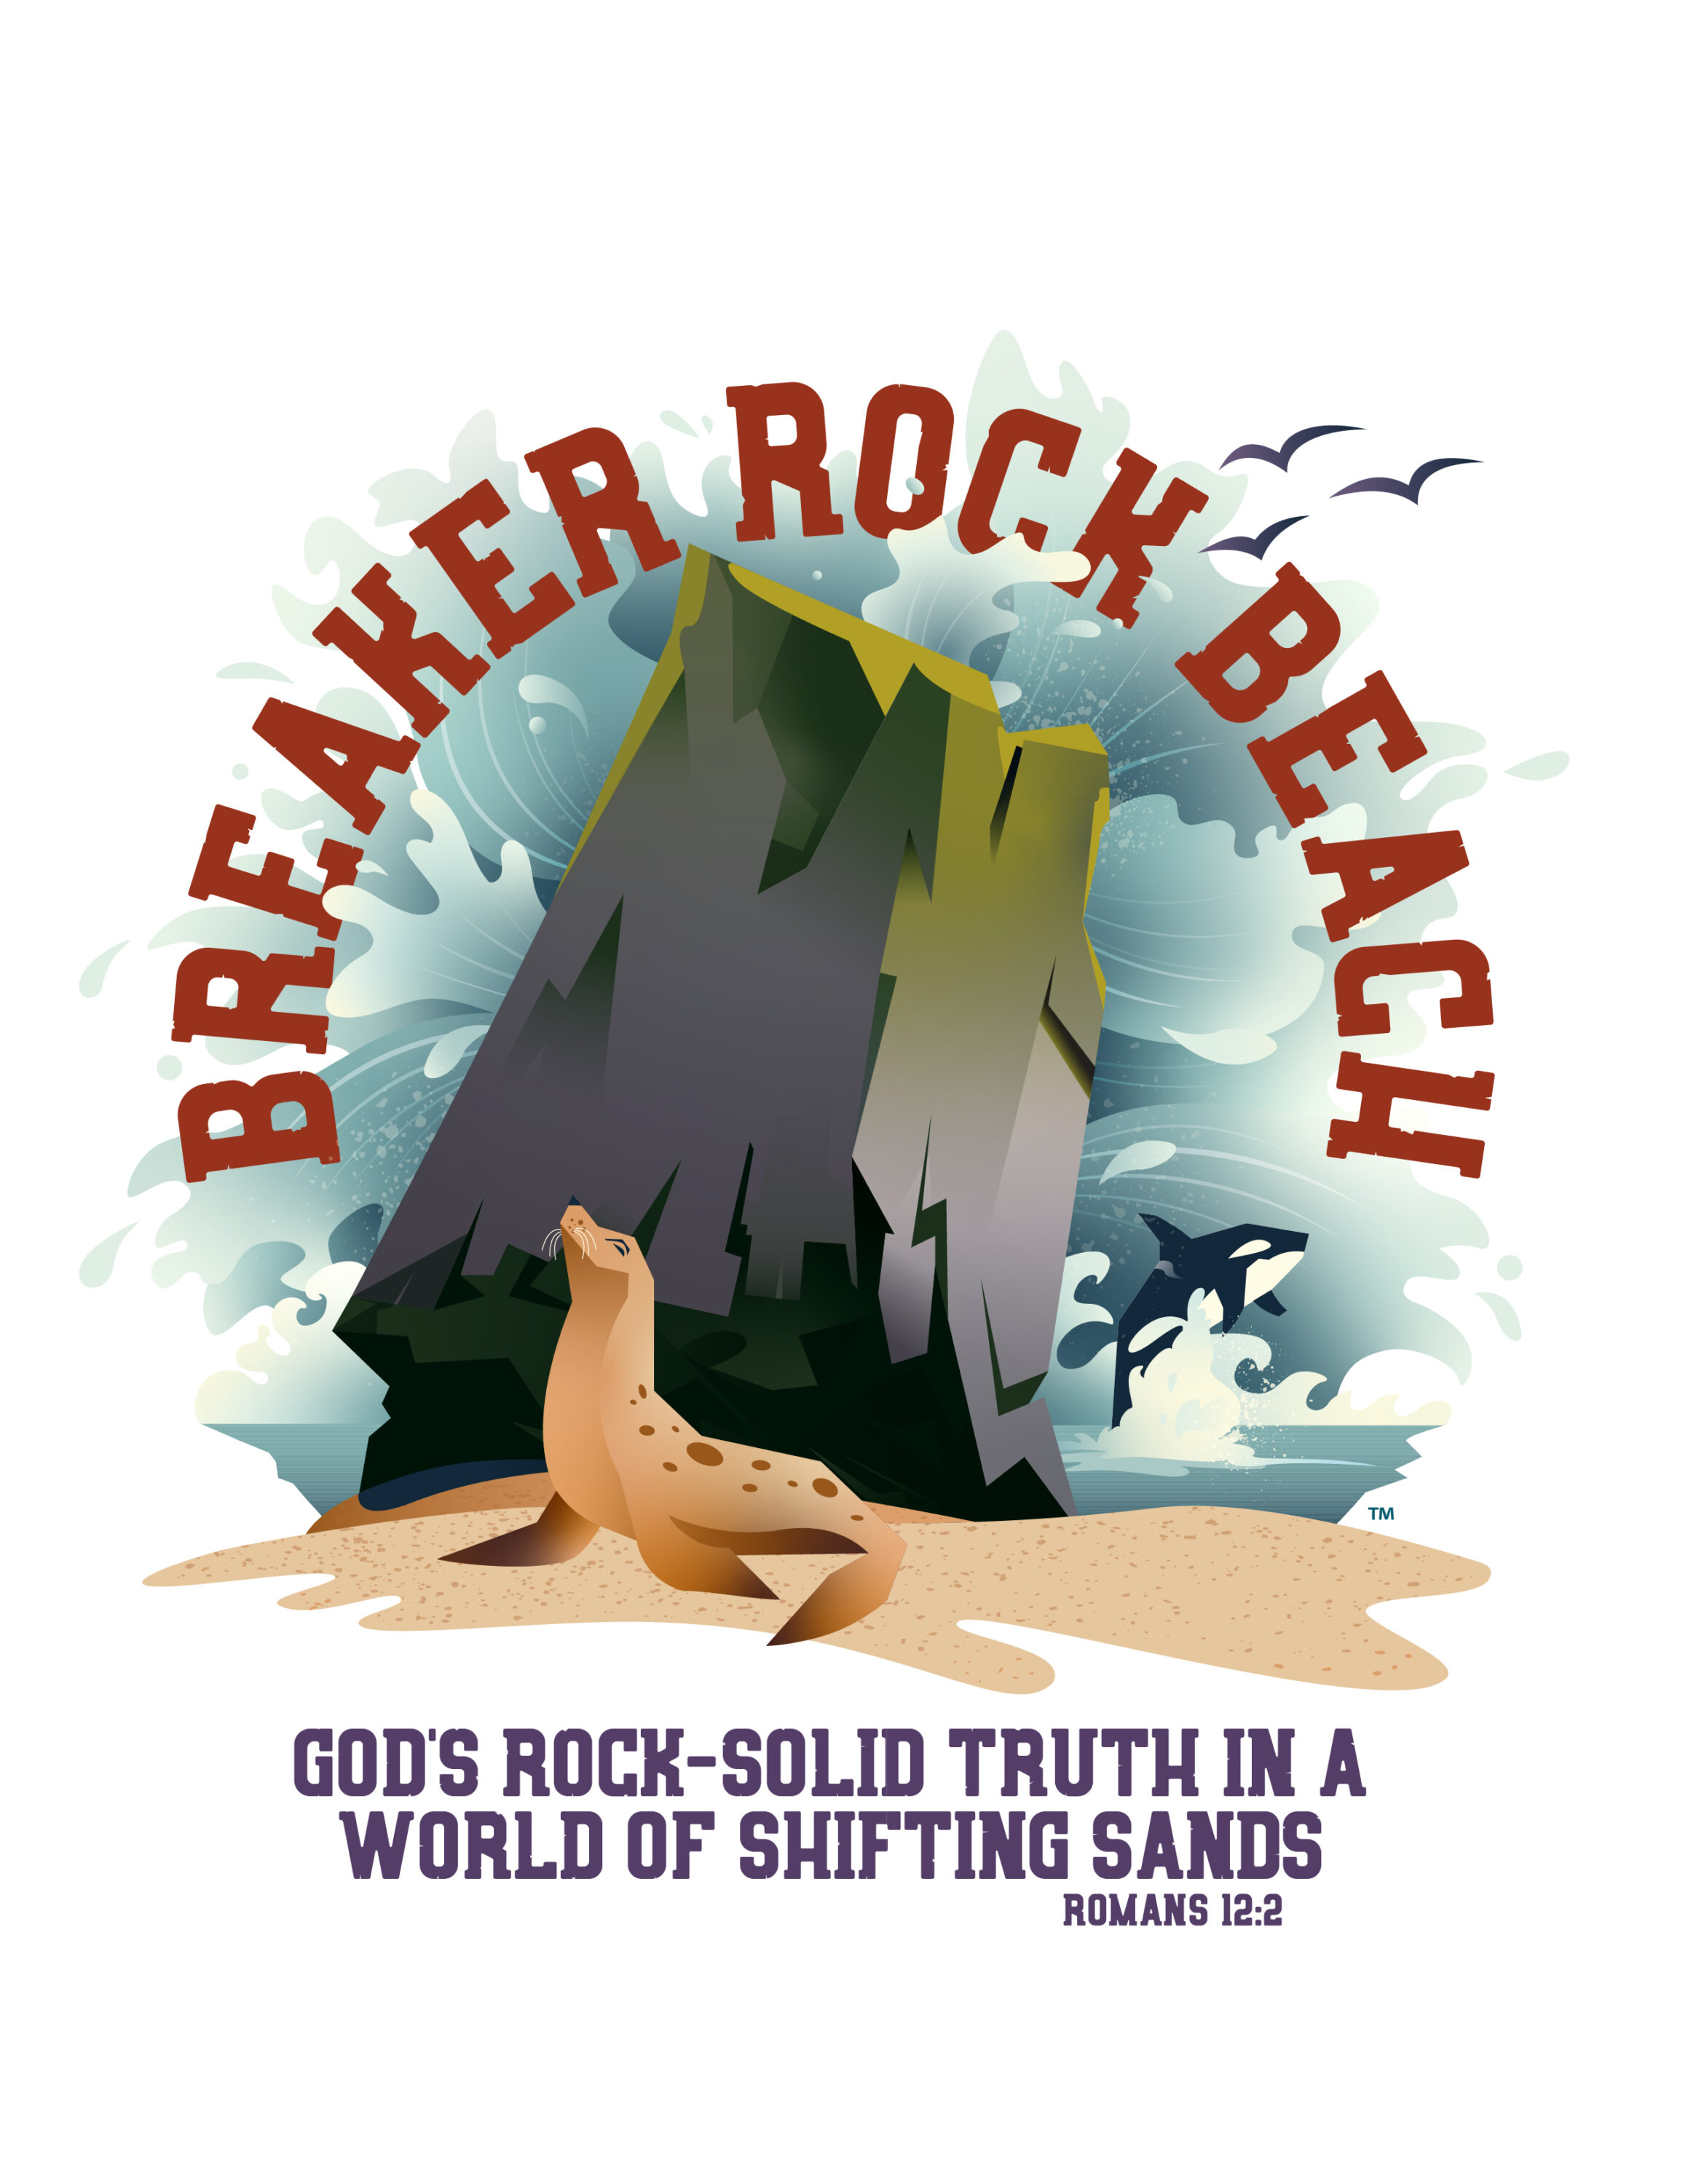 A large cliff rock is in the middle of the image with waves crashing on the back side of the rock. There is a seal on the sandy shore and an orca jumping out of the water in the background. Text says: breaker rock beach. Go's rock-solid truth in a world of shifting sands. Romans 12:2.